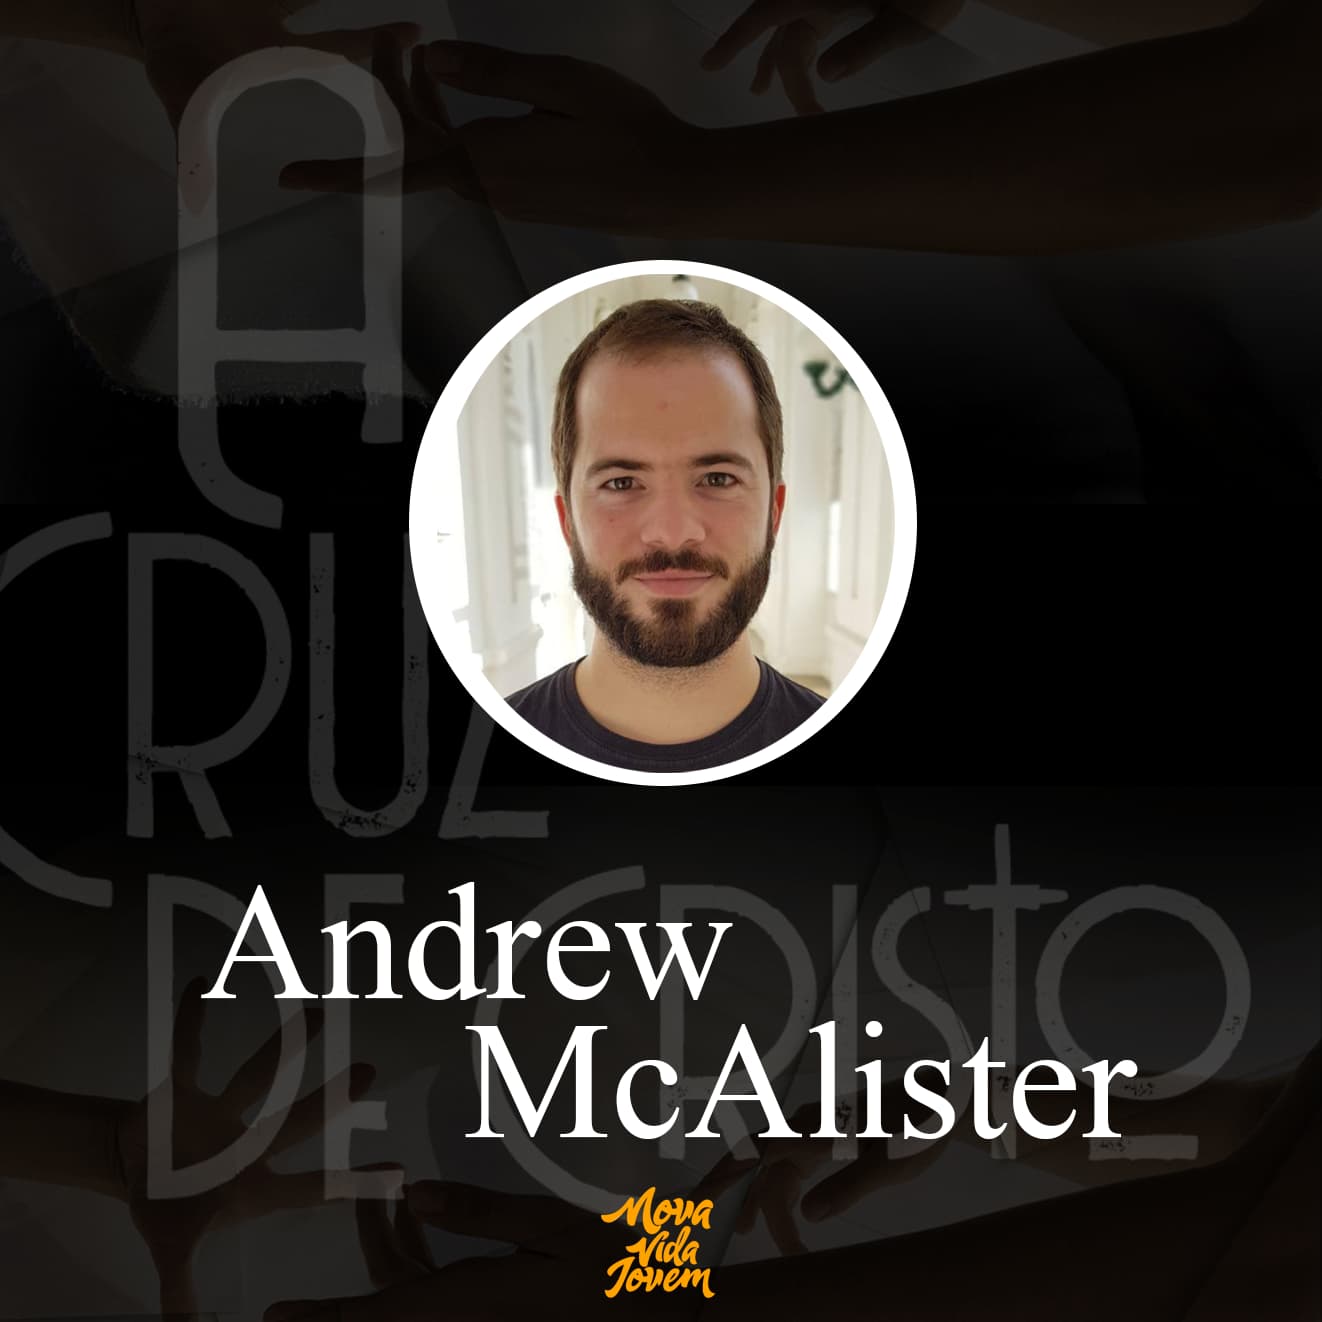 Andrew McAlister